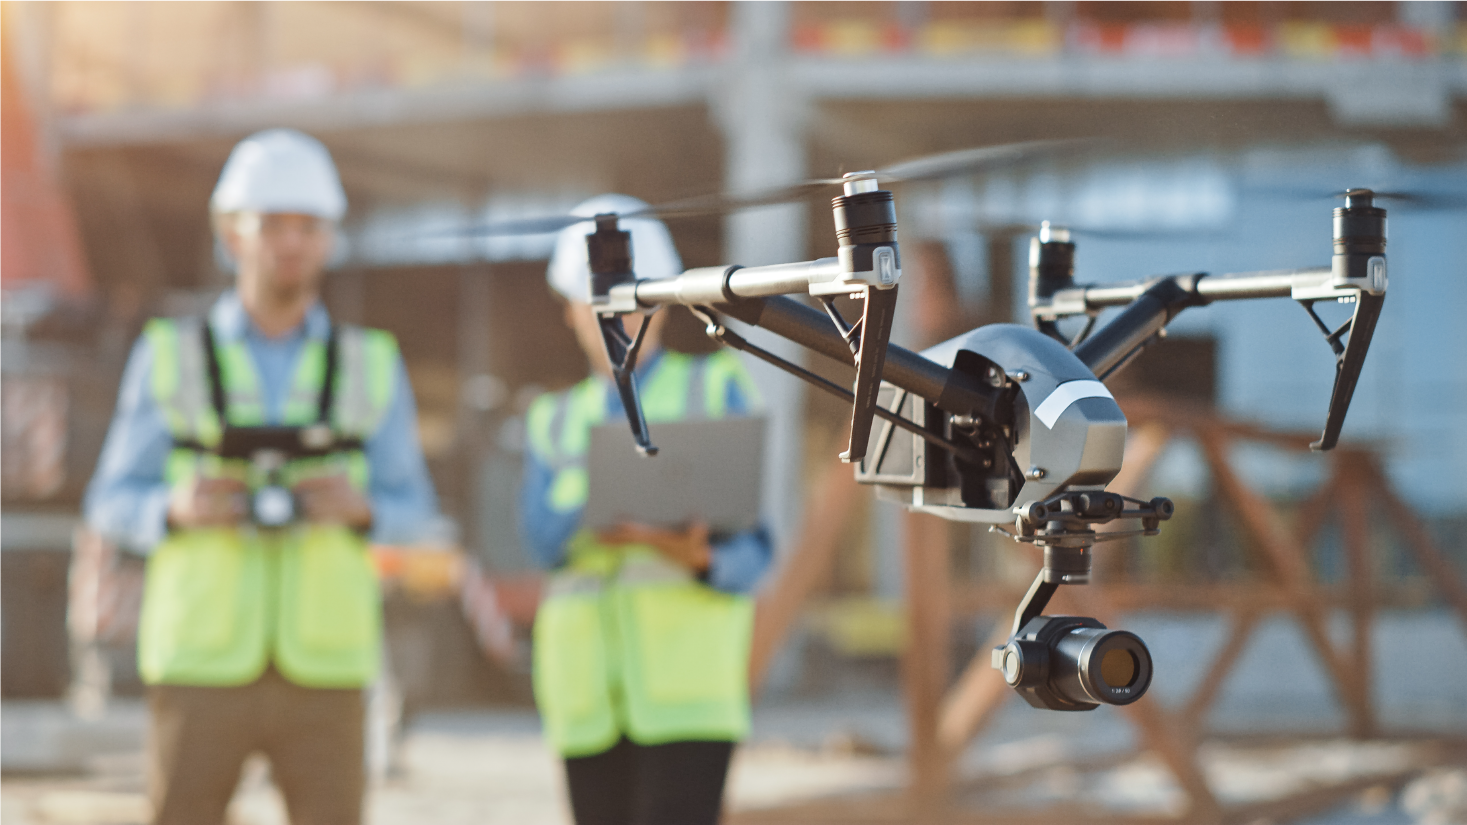 Two men in a hardhat and vest working with a drone, ready for aerial inspection or surveying tasks.